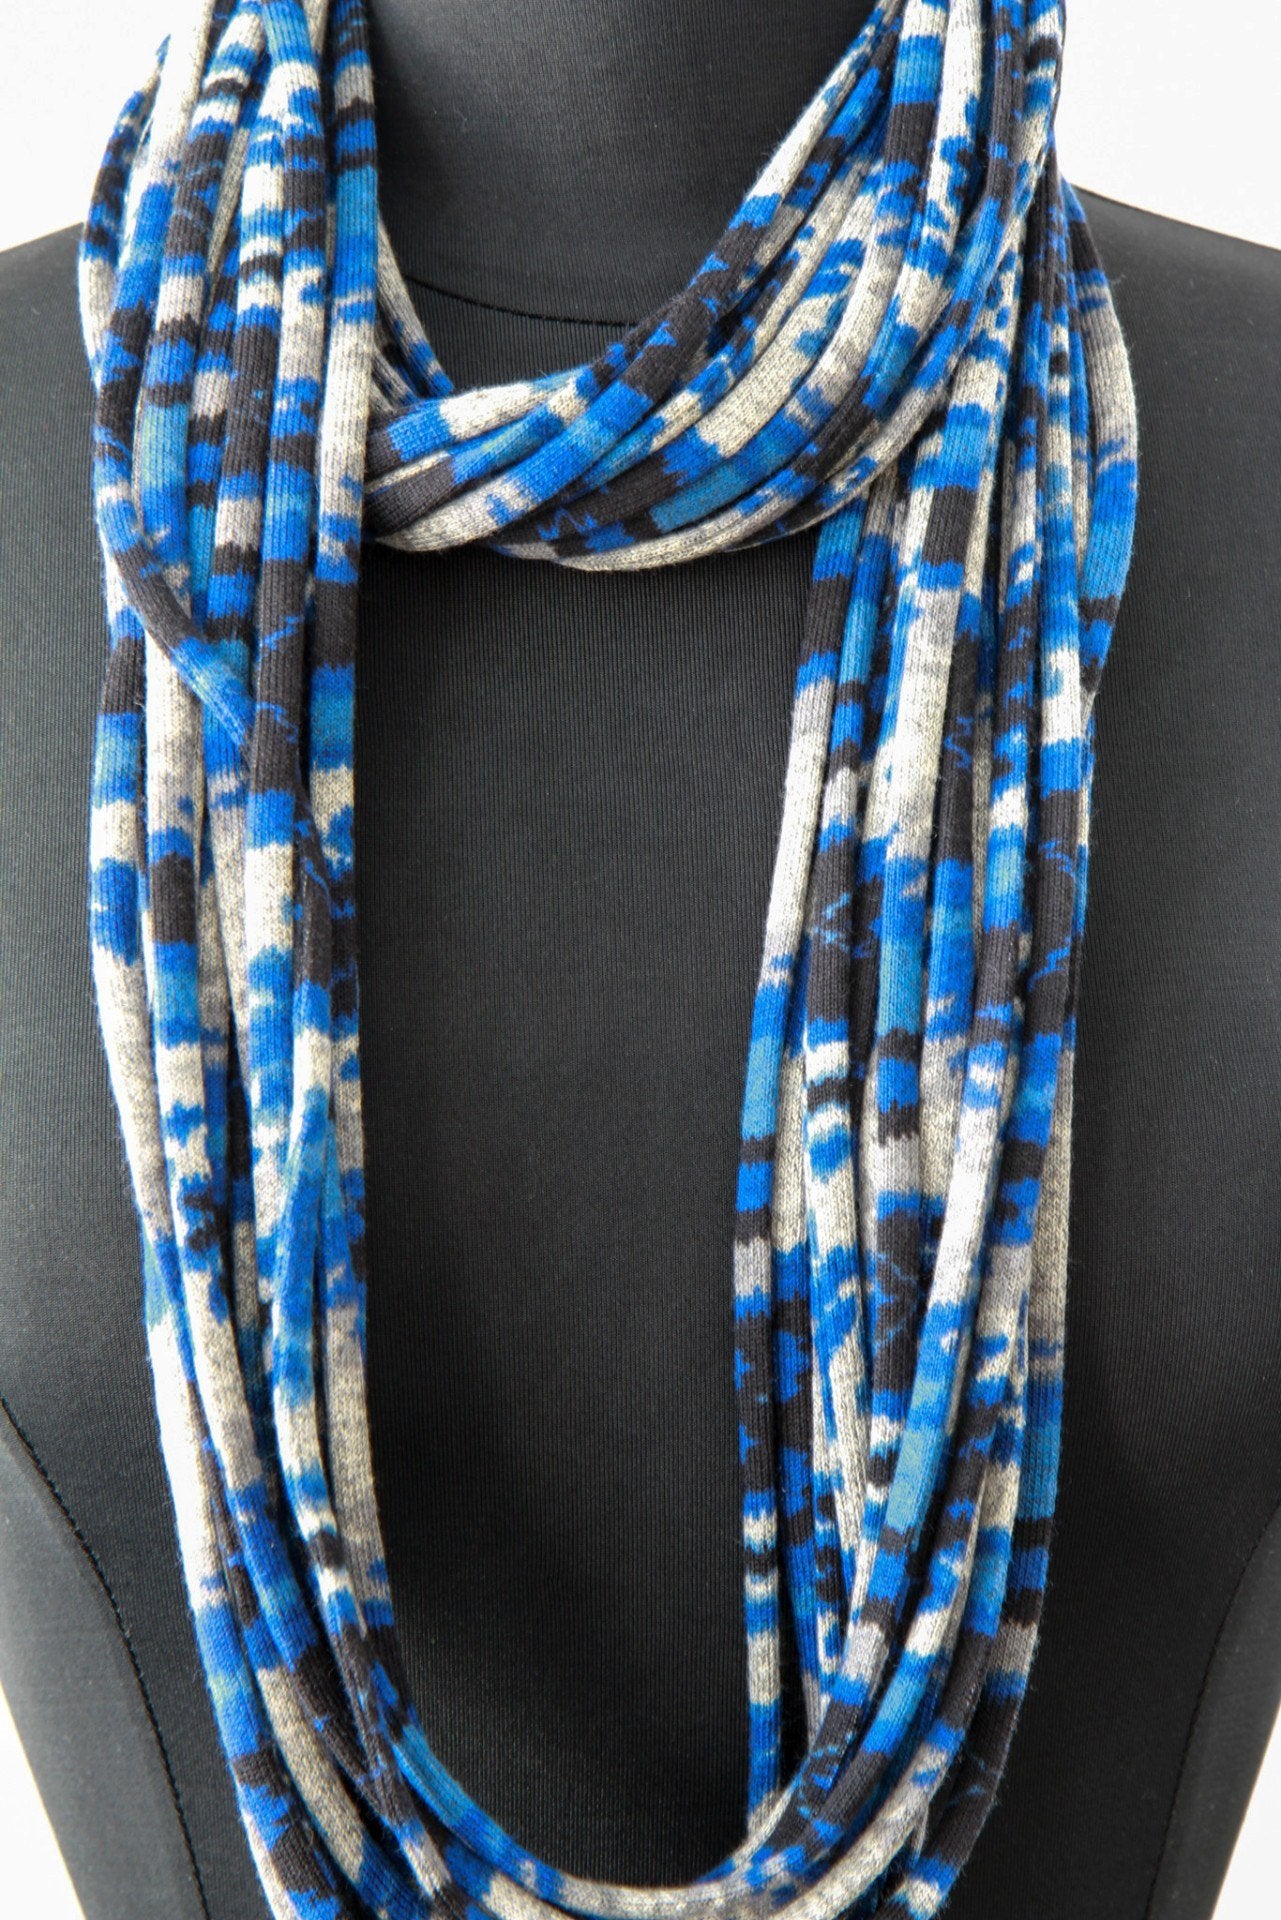 Dark Blue and Grey Graphic Print Infinity Scarf for Men or Women. Made in Canada